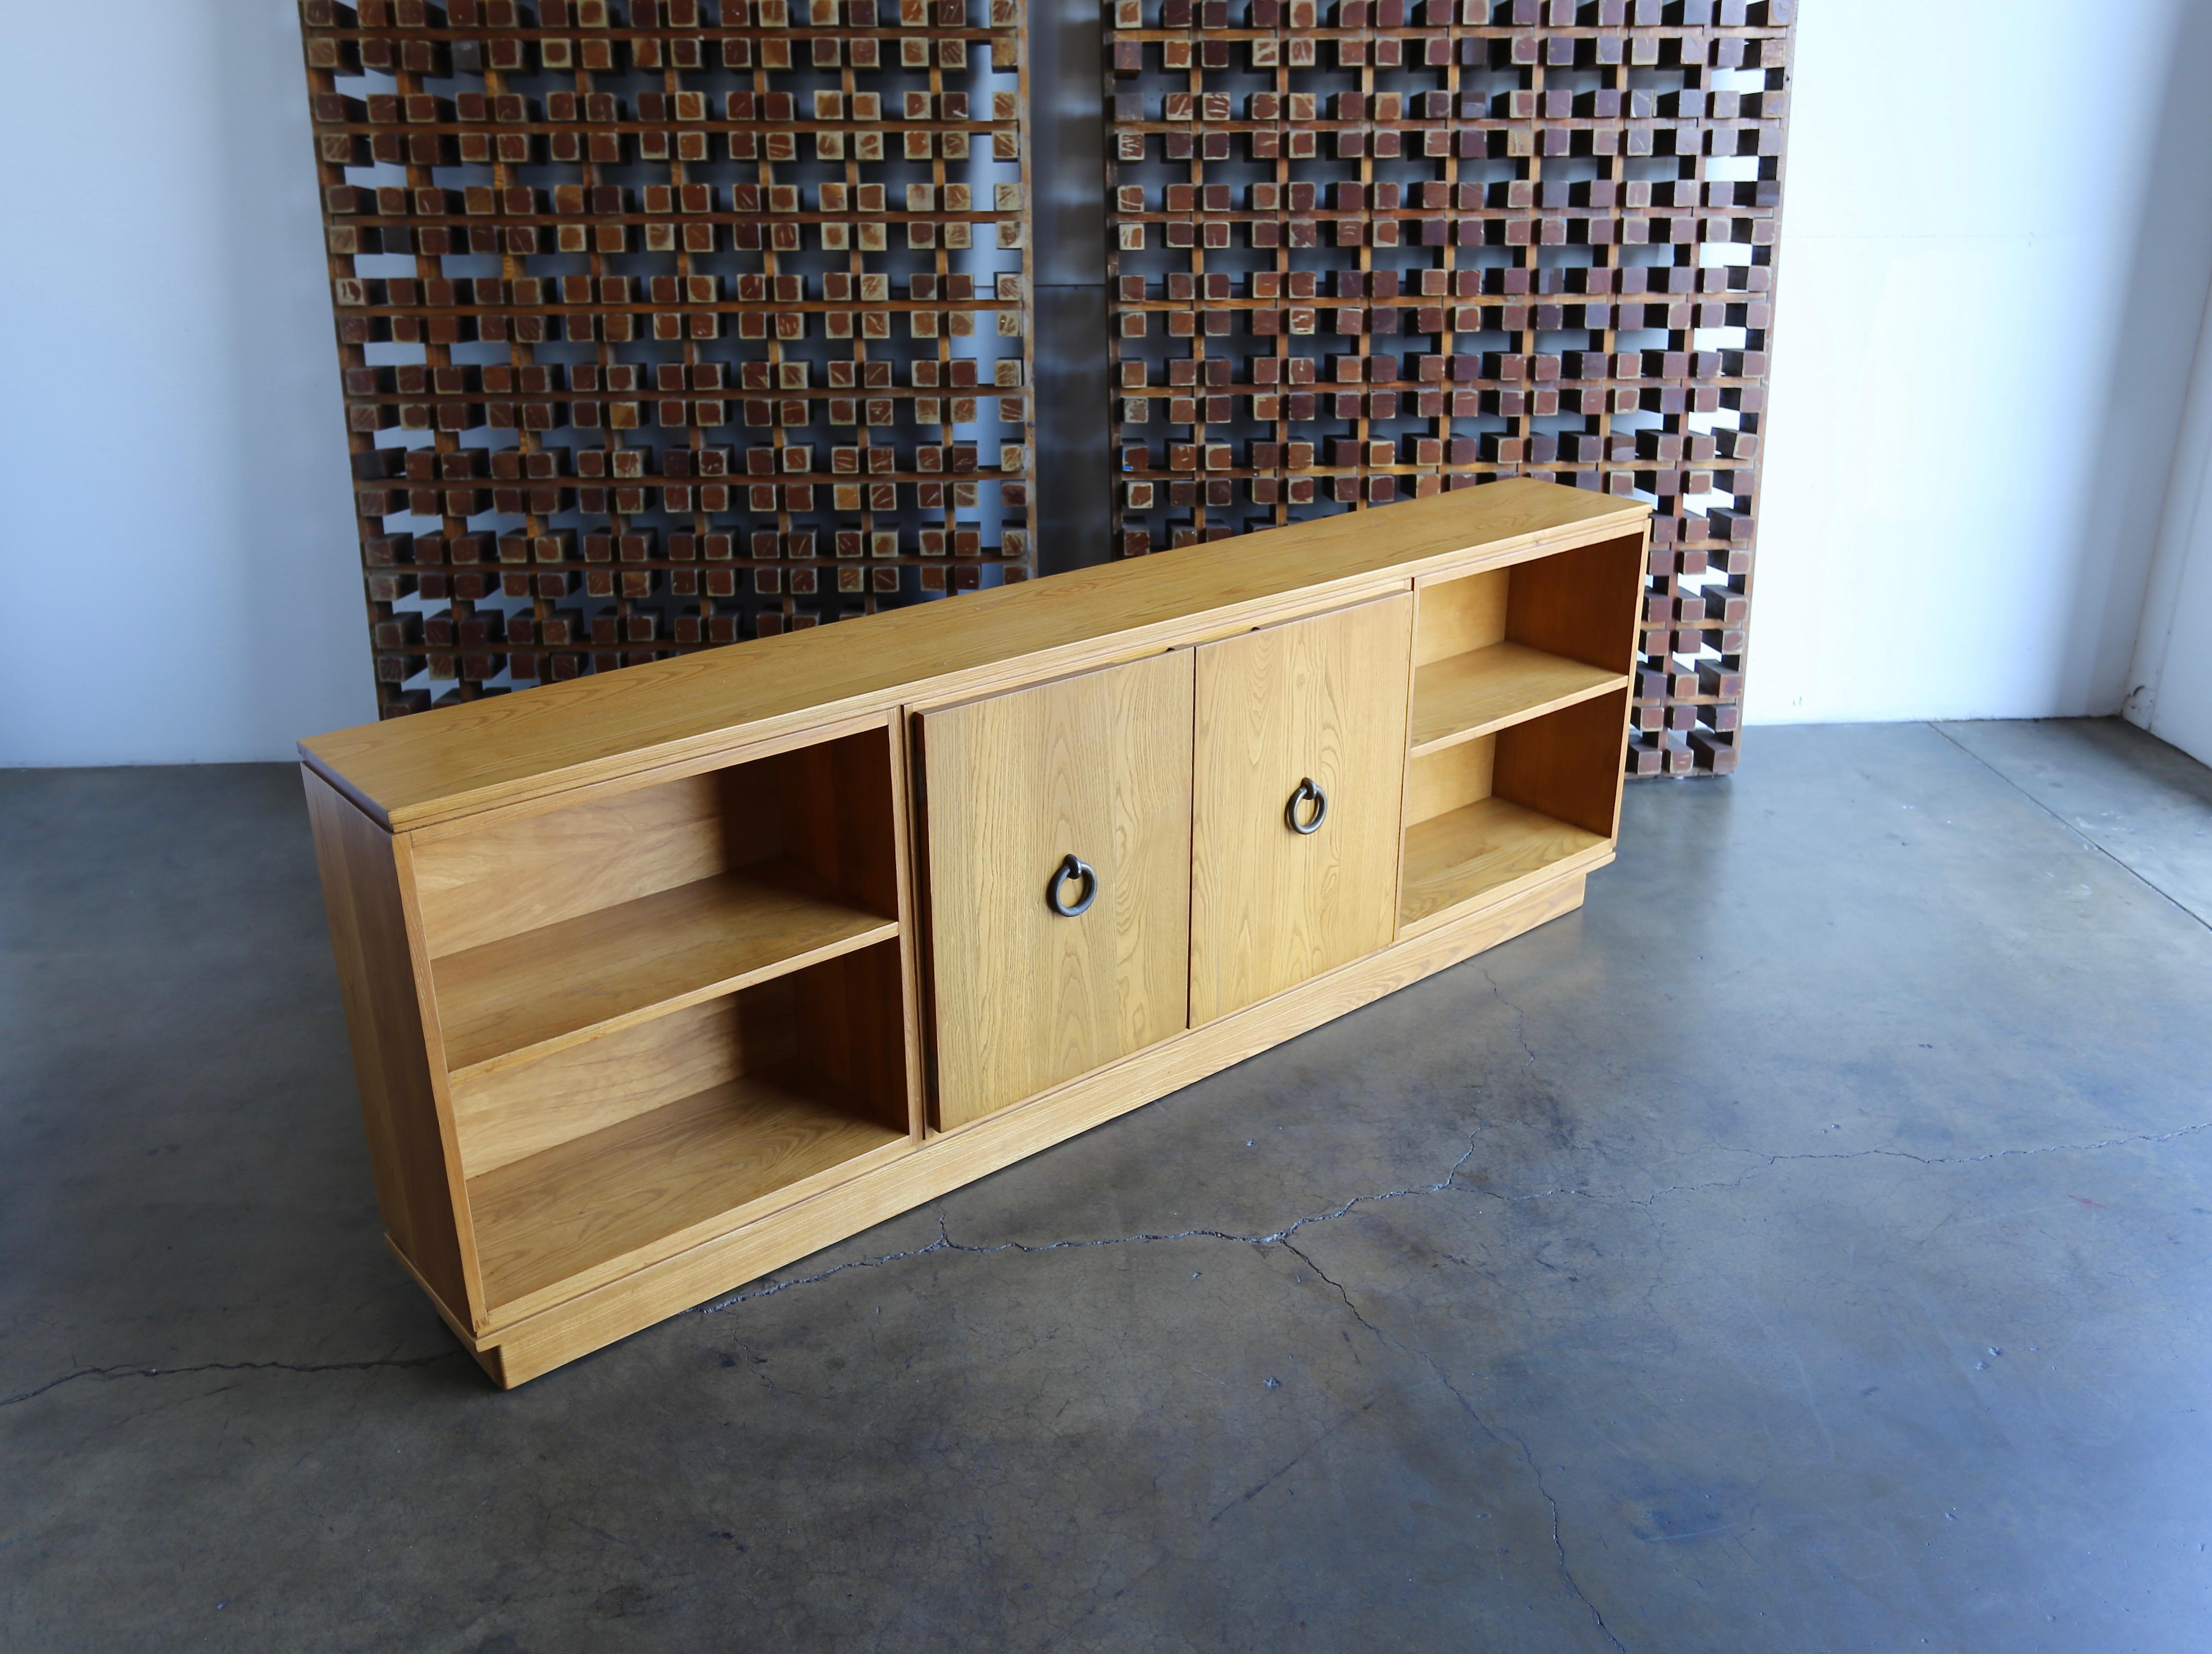 Oak cabinet / bookcase by Paul Laszlo, circa 1950. This piece has been professionally restored.